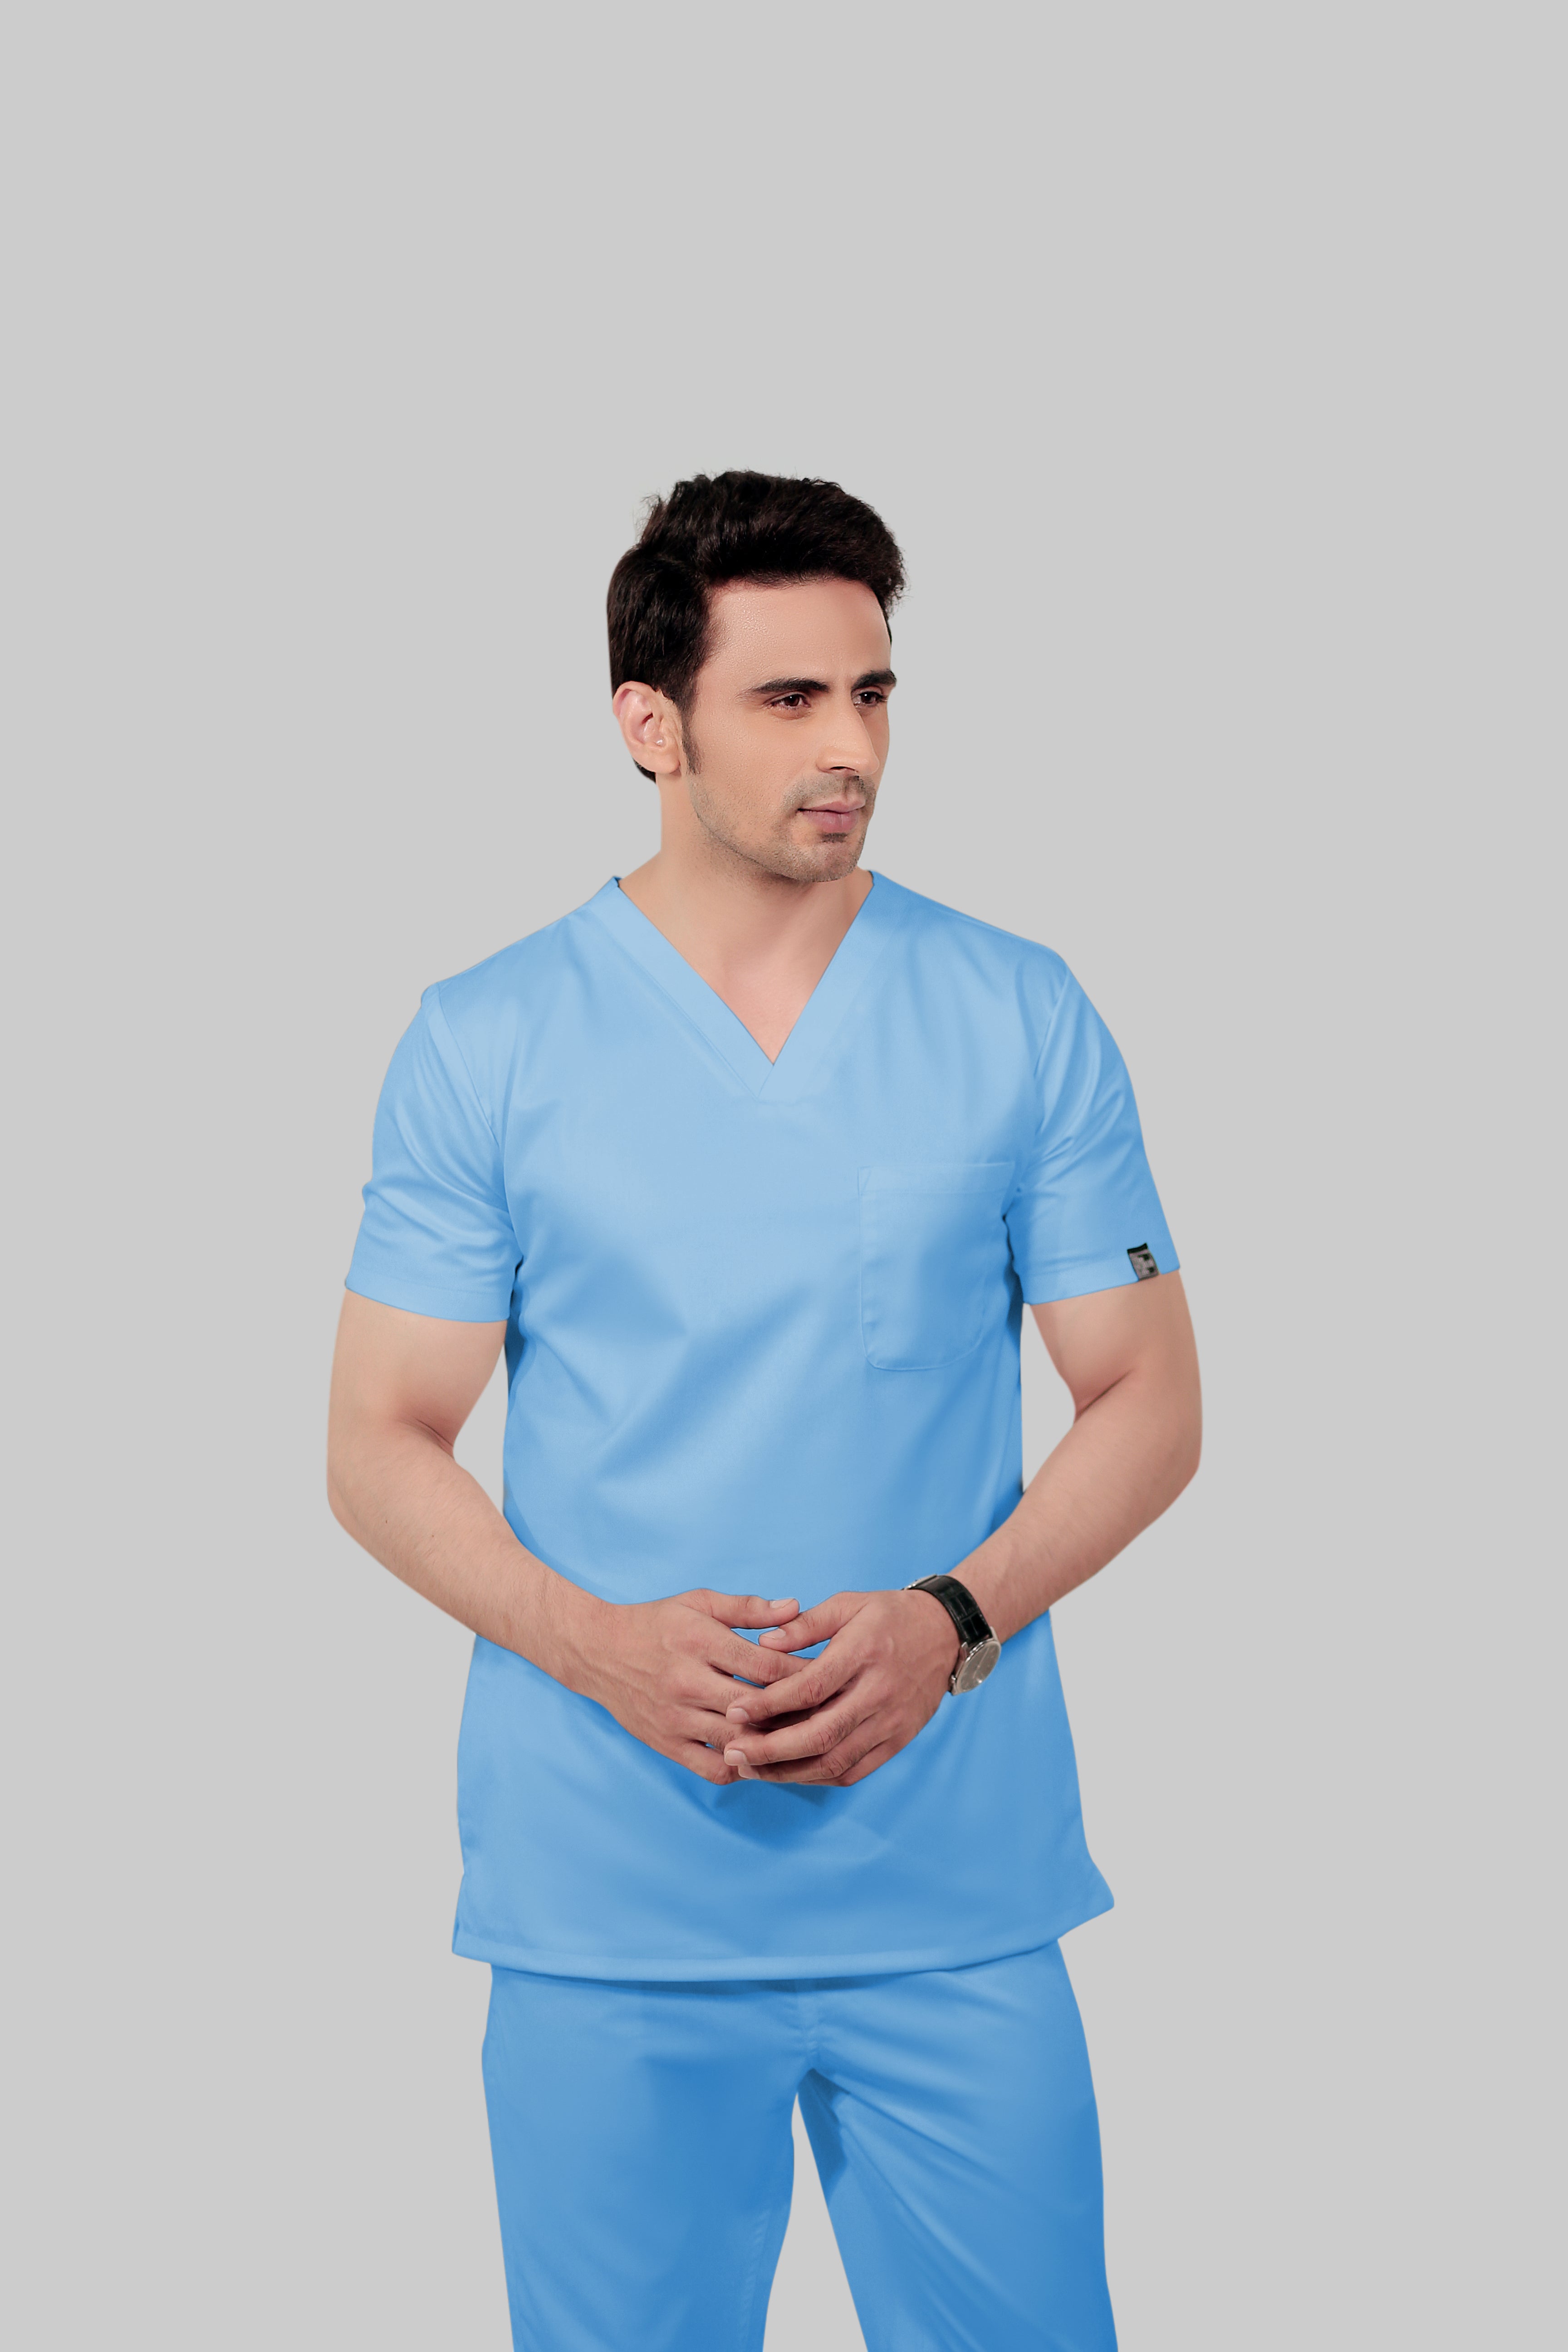 Different Design and sizes Gown | Medical Doctor Gown | Ot Gowns |Surgical  Gown for Doctors | Best Medical Uniform Supplier in Delhi